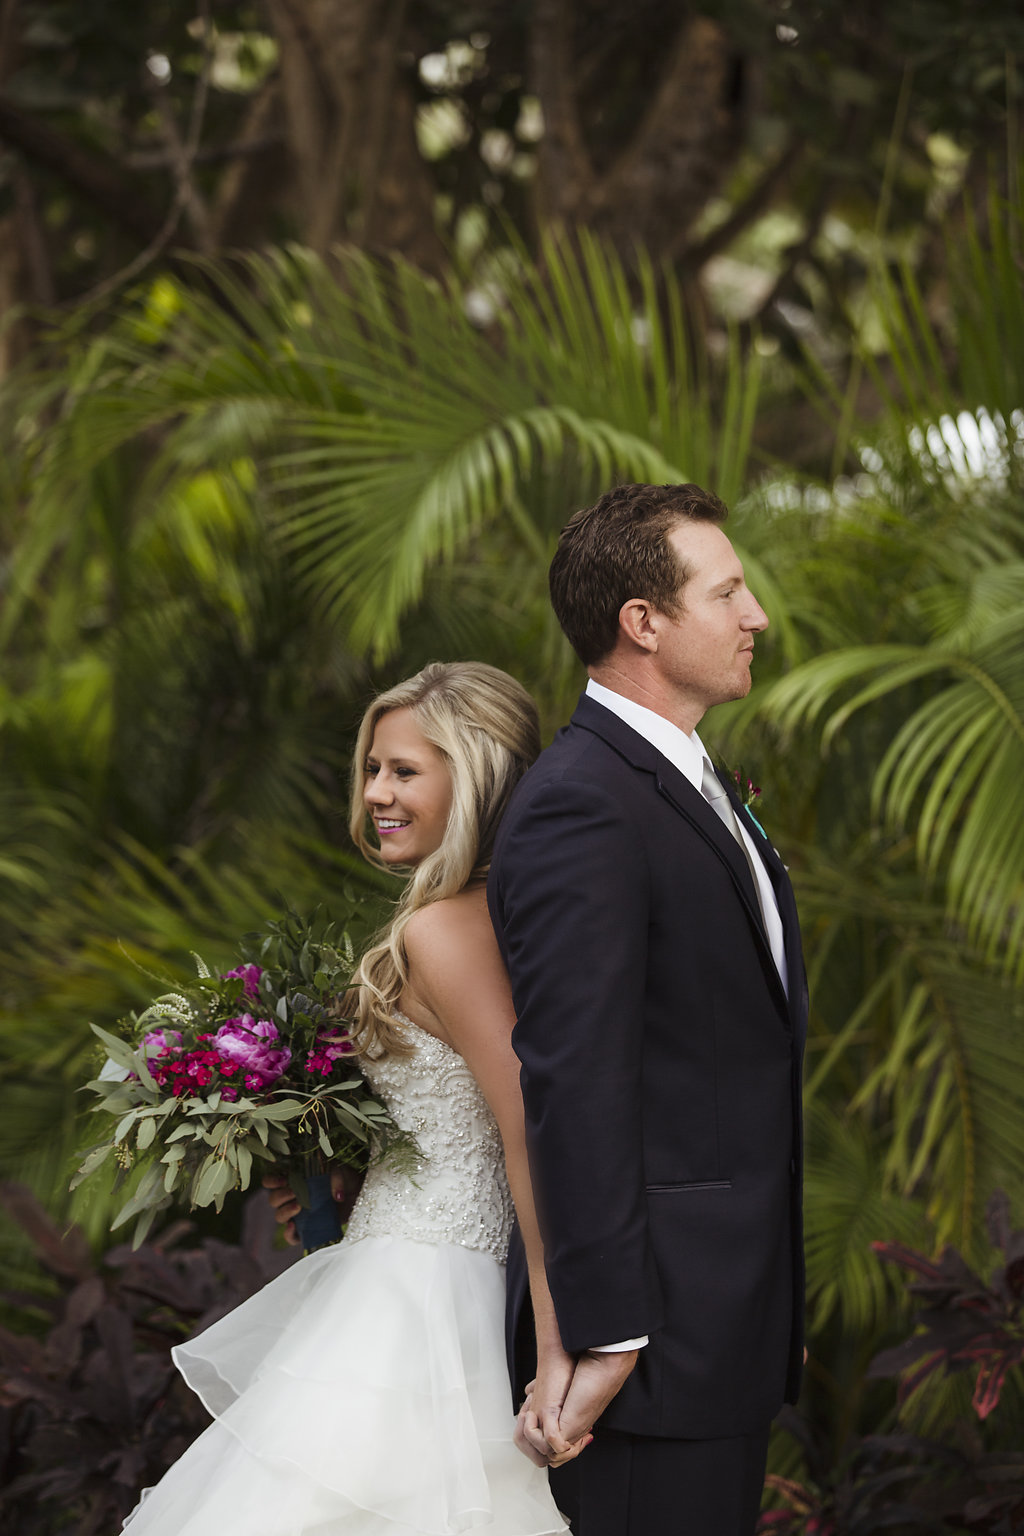 Outdoor Tropical Garden First Look Portrait, Bride In Strapless Layered Ballgown Wedding Dress with Fuchsia Floral and Greenery Bouquet Wrapped in Turquoise Ribbon | Jewel Toned Longboat Key Wedding